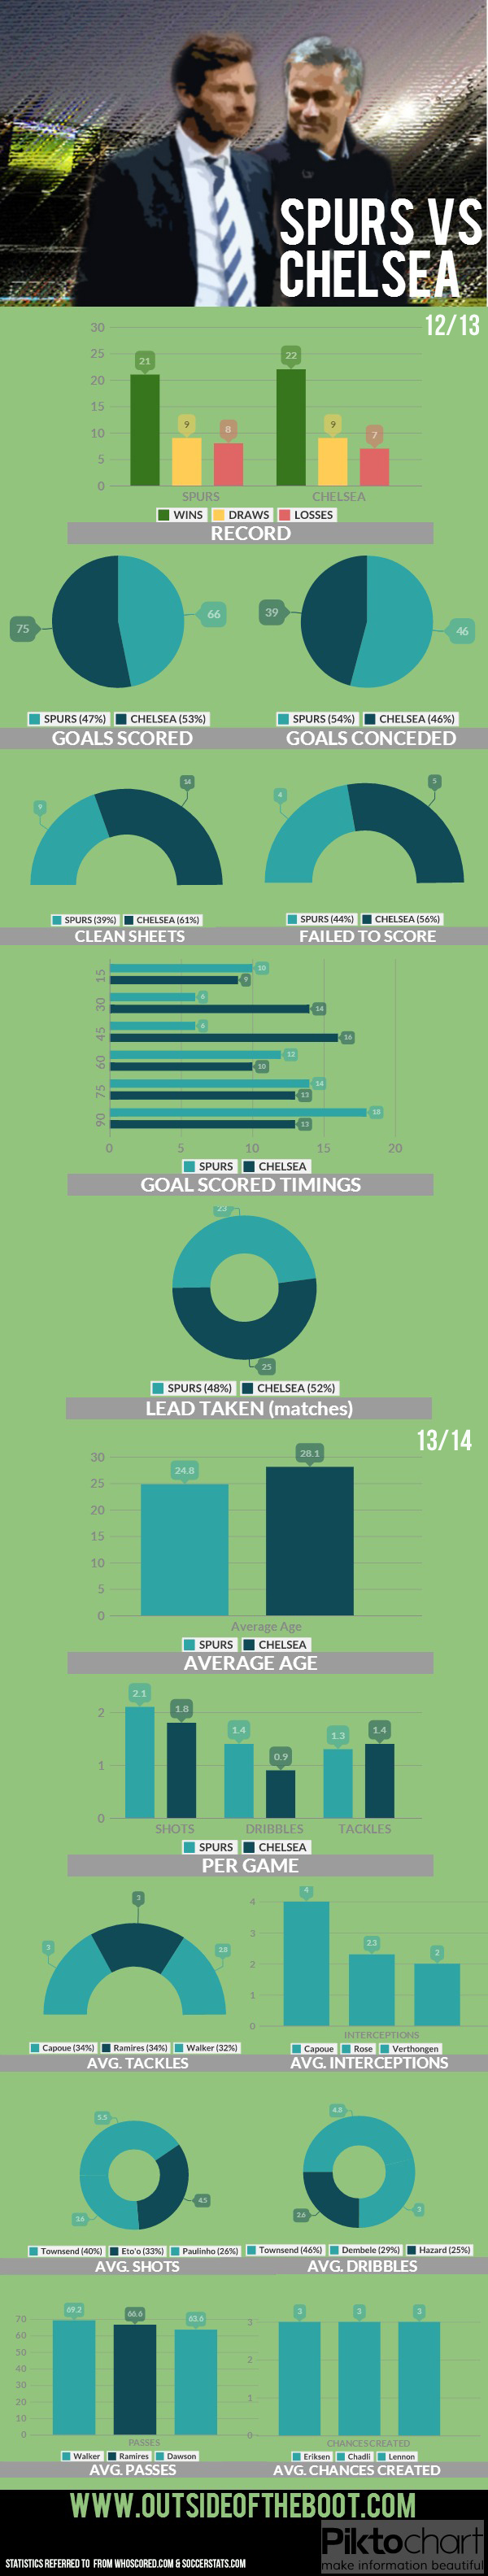 Spurs-Chelsea Infographic